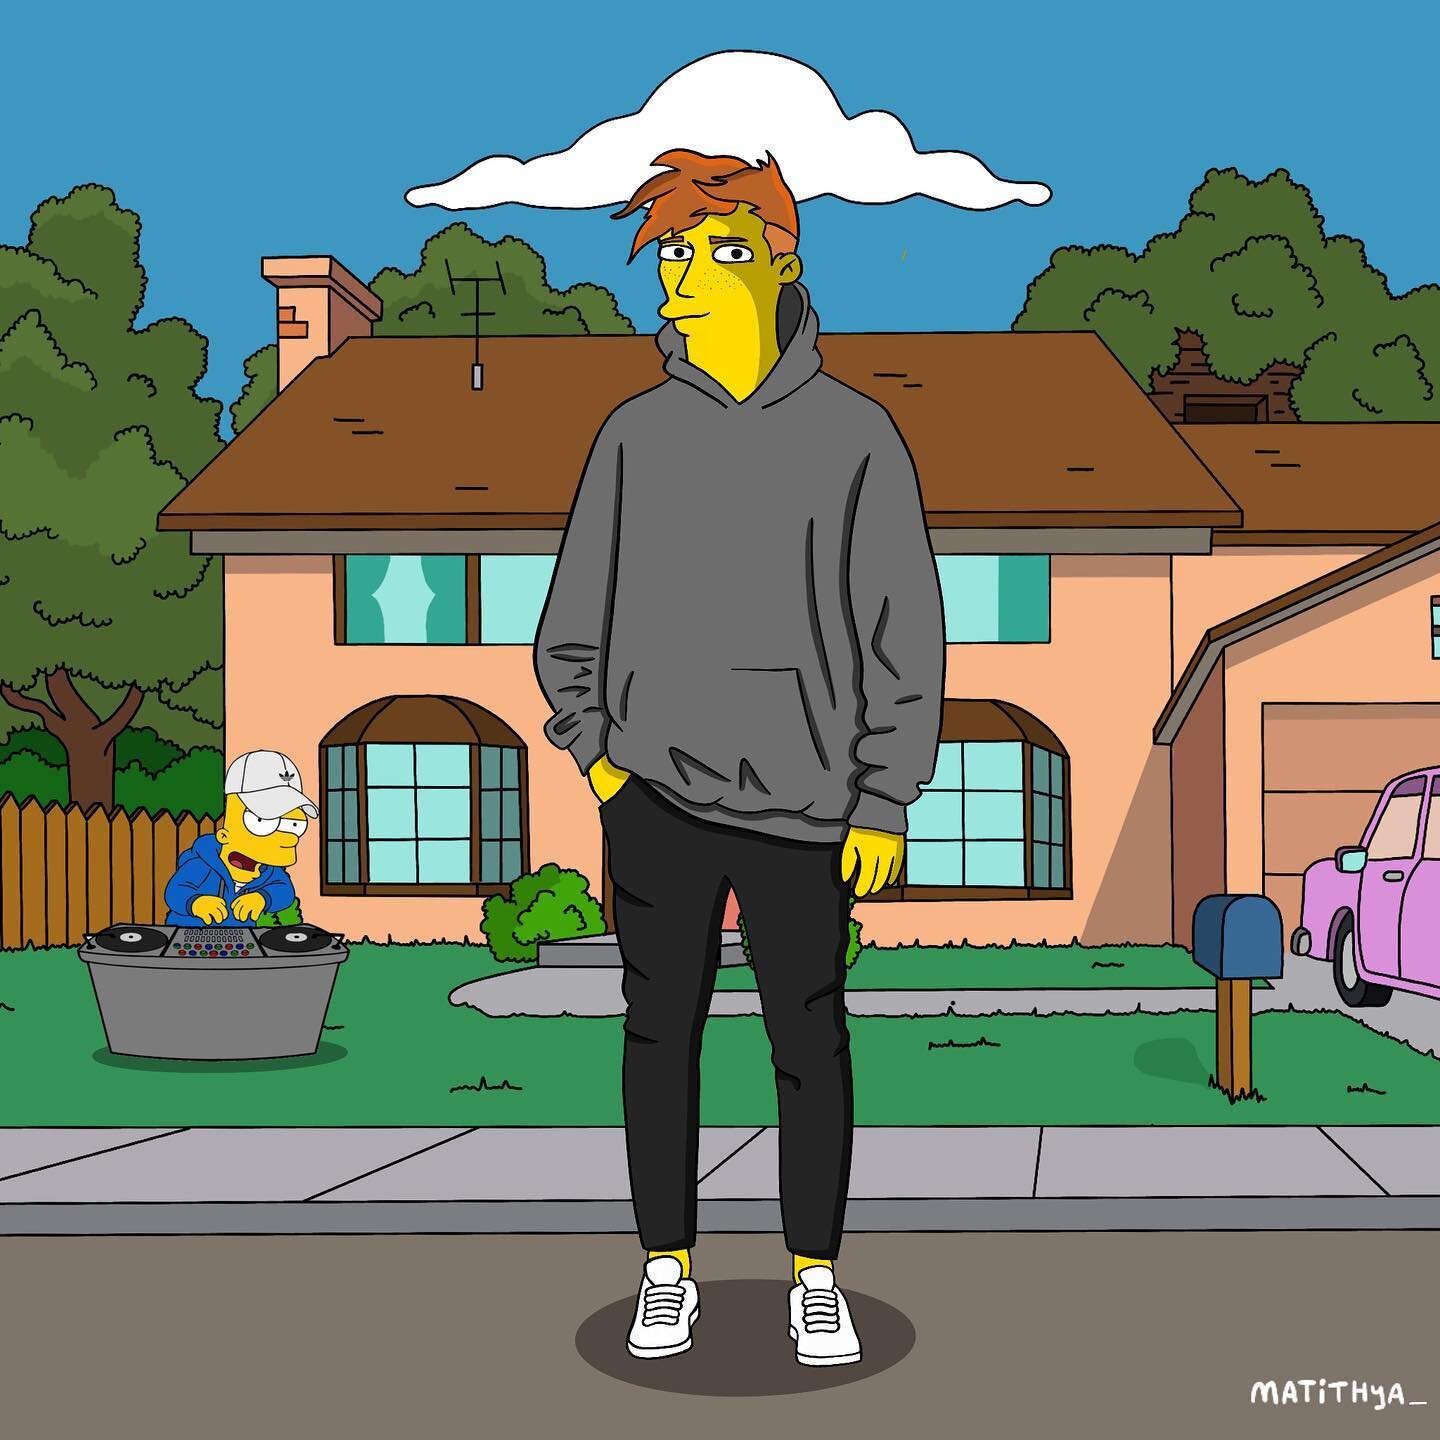 Can&rsquo;t believe I&rsquo;m featuring in the Simpsons tomorrow on @foxtv

jk, how sick is this tho? 😂 @matithya_ @matithya_ @matithya_